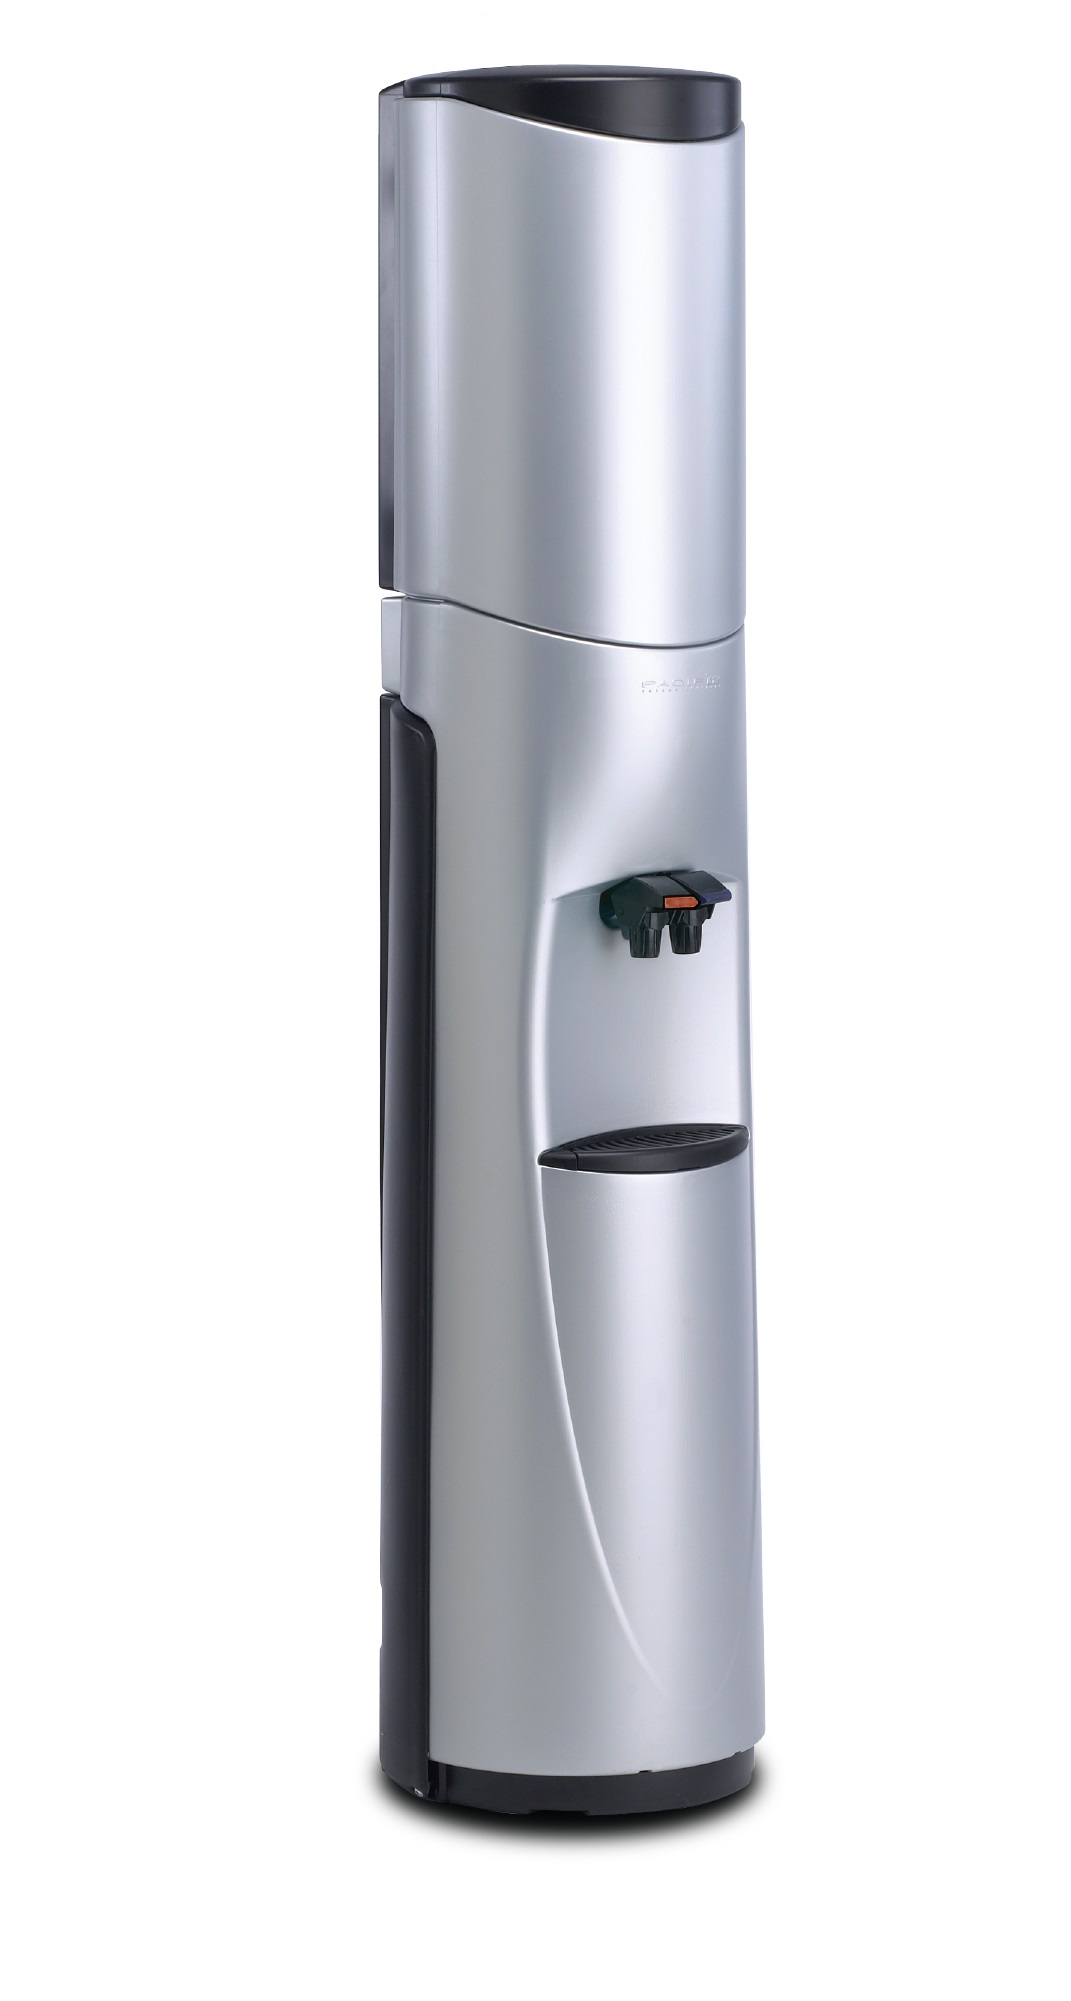 Pacifik Water Cooler - Silver with Black Trim - New technology for a whole new kind of bottled water cooler, Hot & Cold